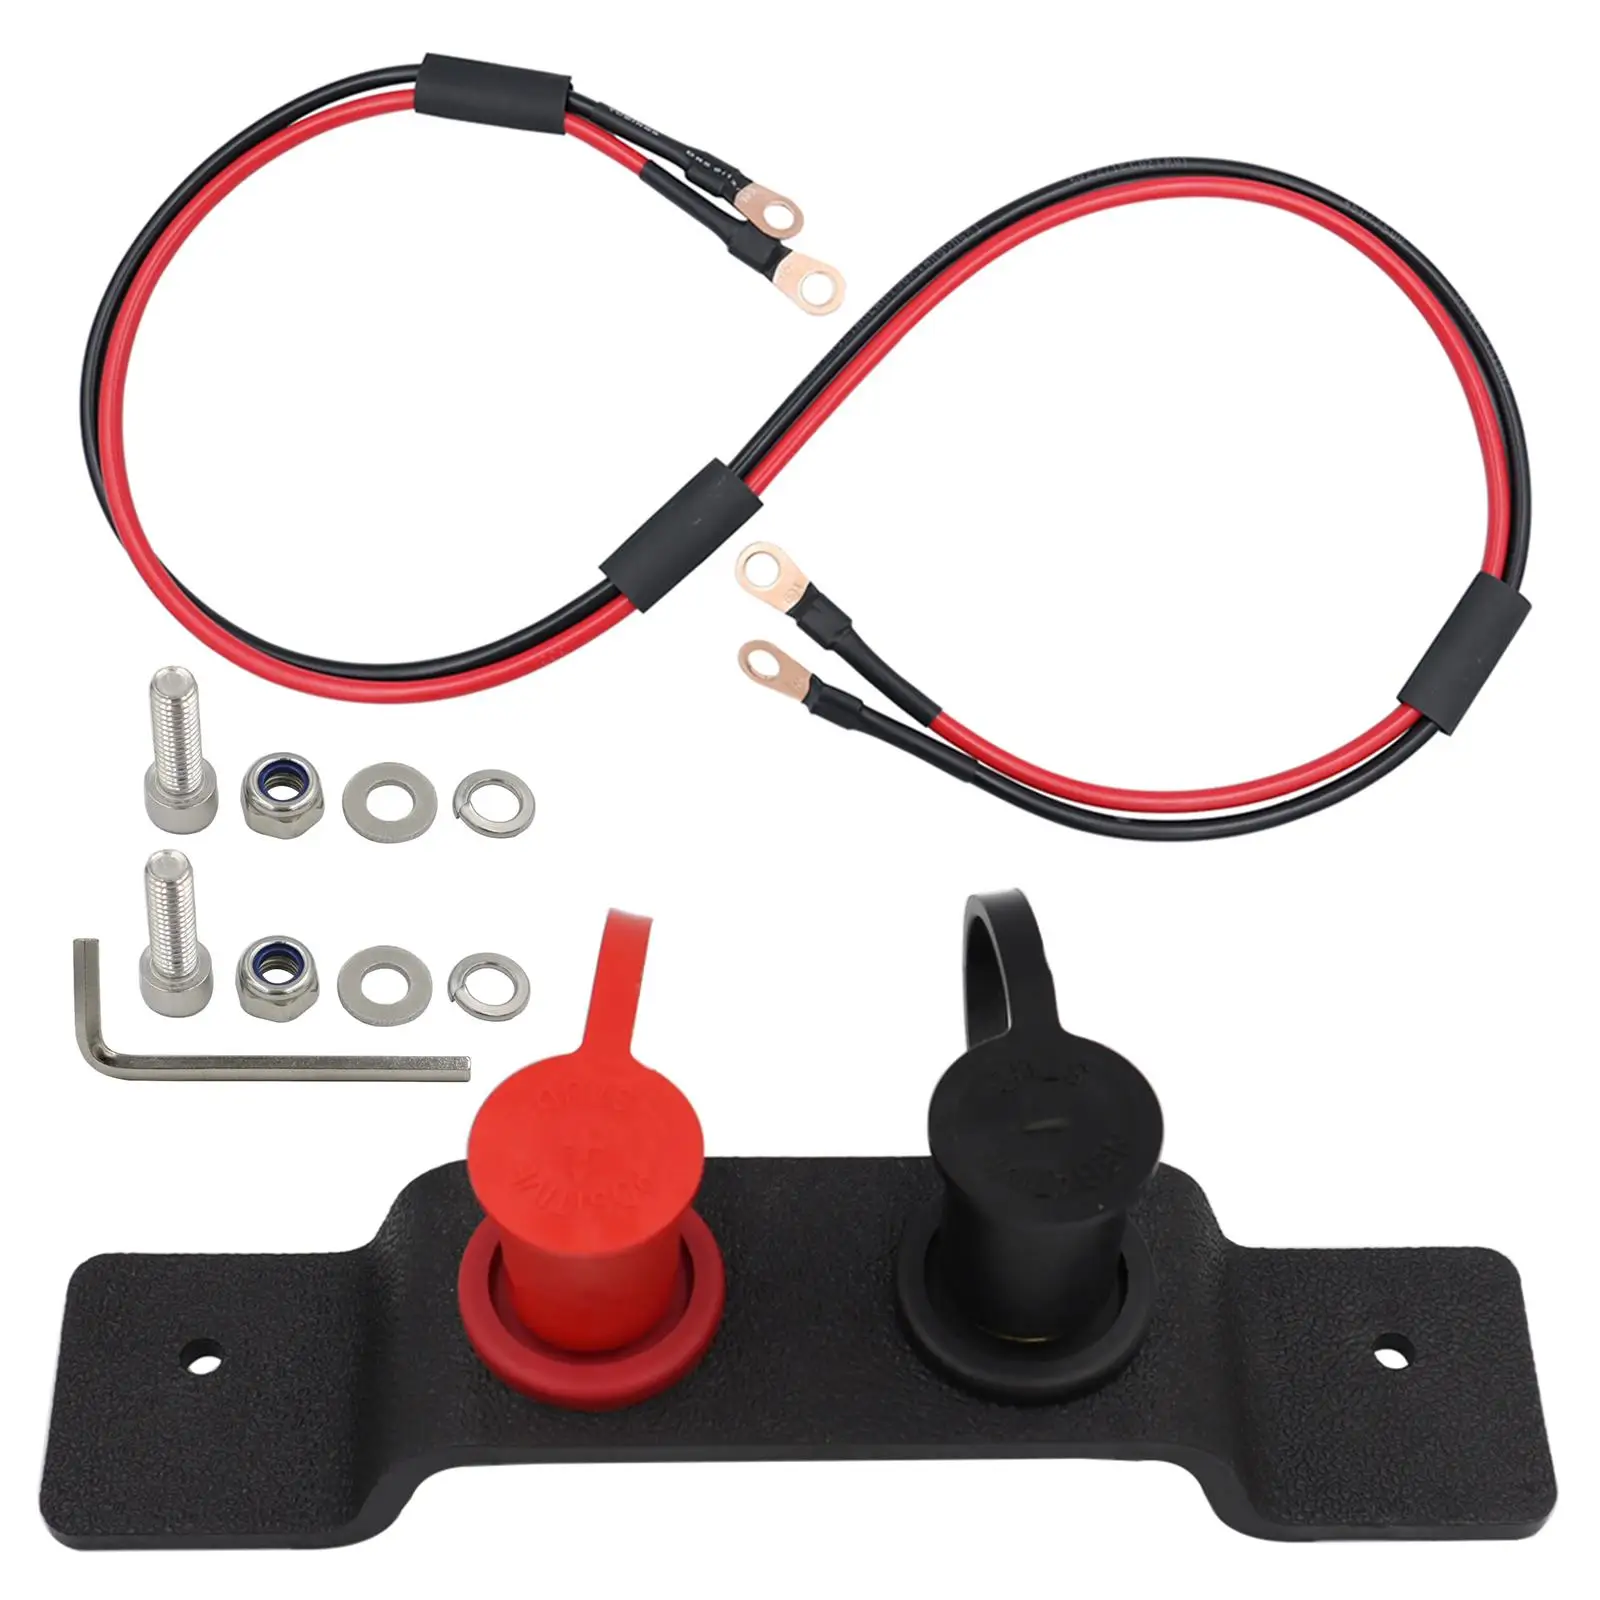 Car Battery Jump Post Starter Battery Terminals Relocation Kit Quick Easy Charging Fit for Can AM x3 Lawn Mowers UTV ATV Boats